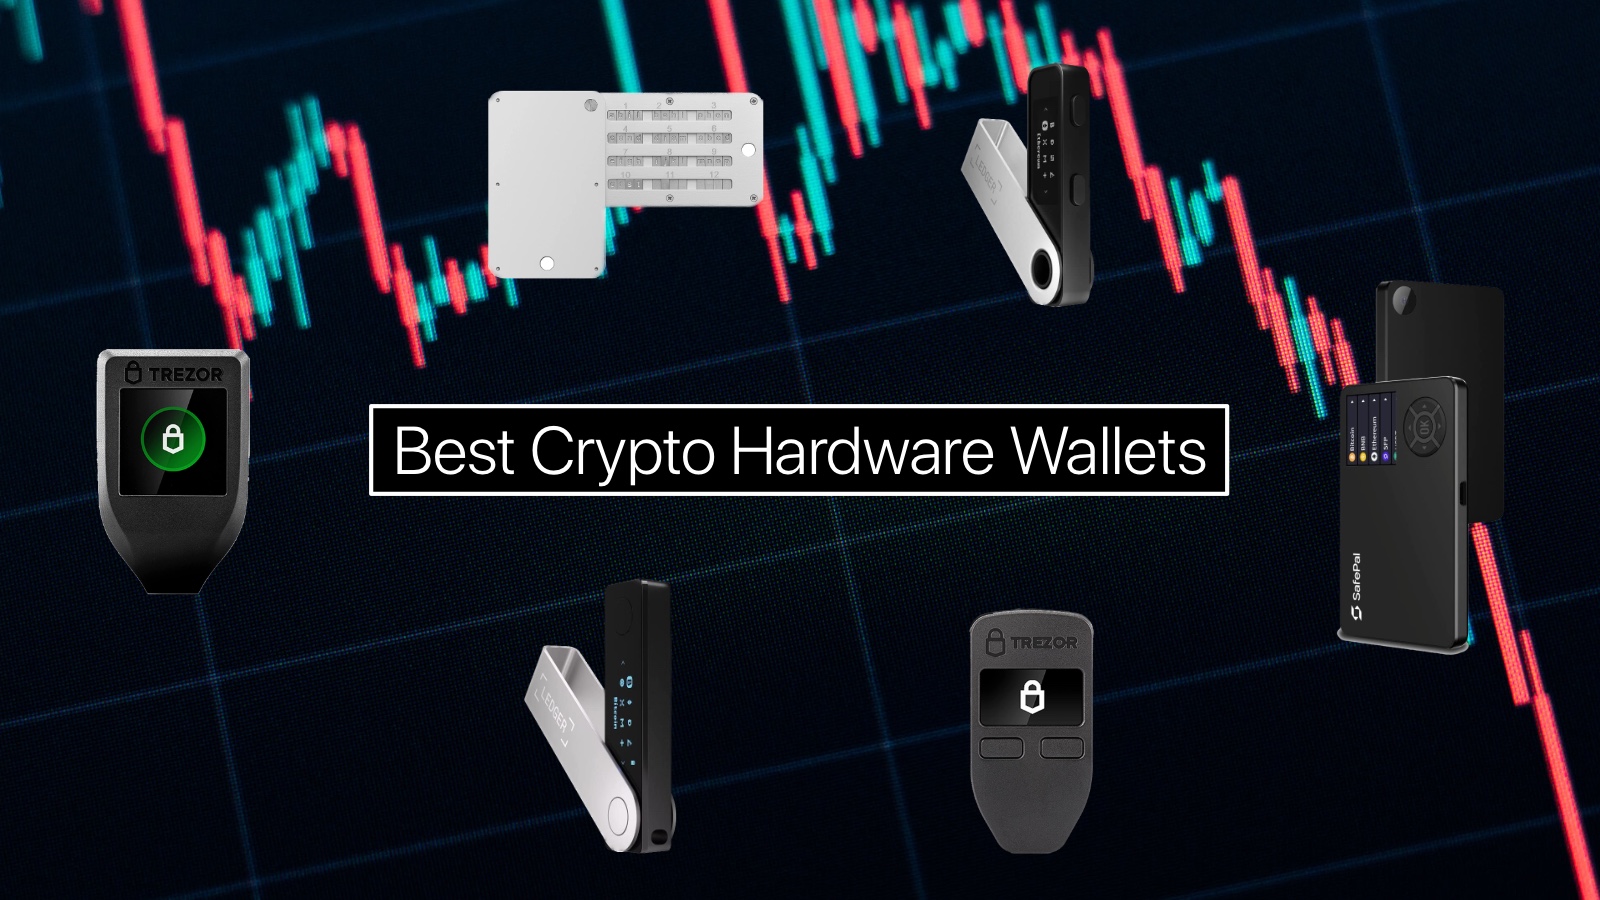 Best Crypto Hardware Wallets to Get for Keeping Your Crypto Safe iOS